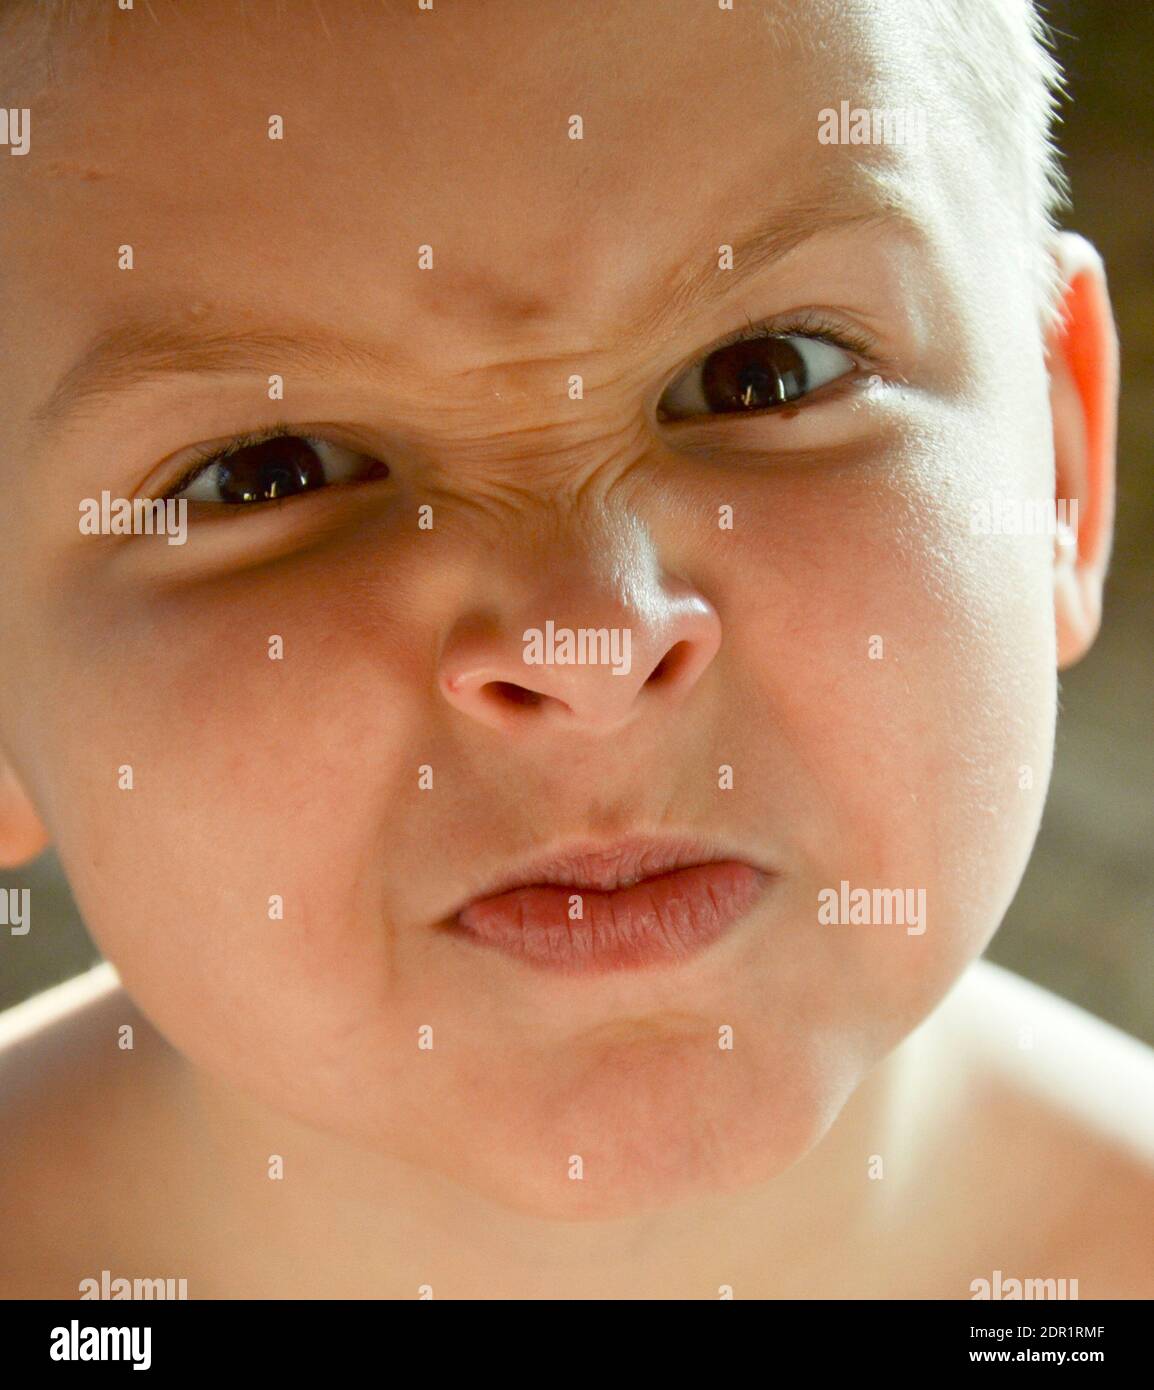 portrait of a frowning child Stock Photo